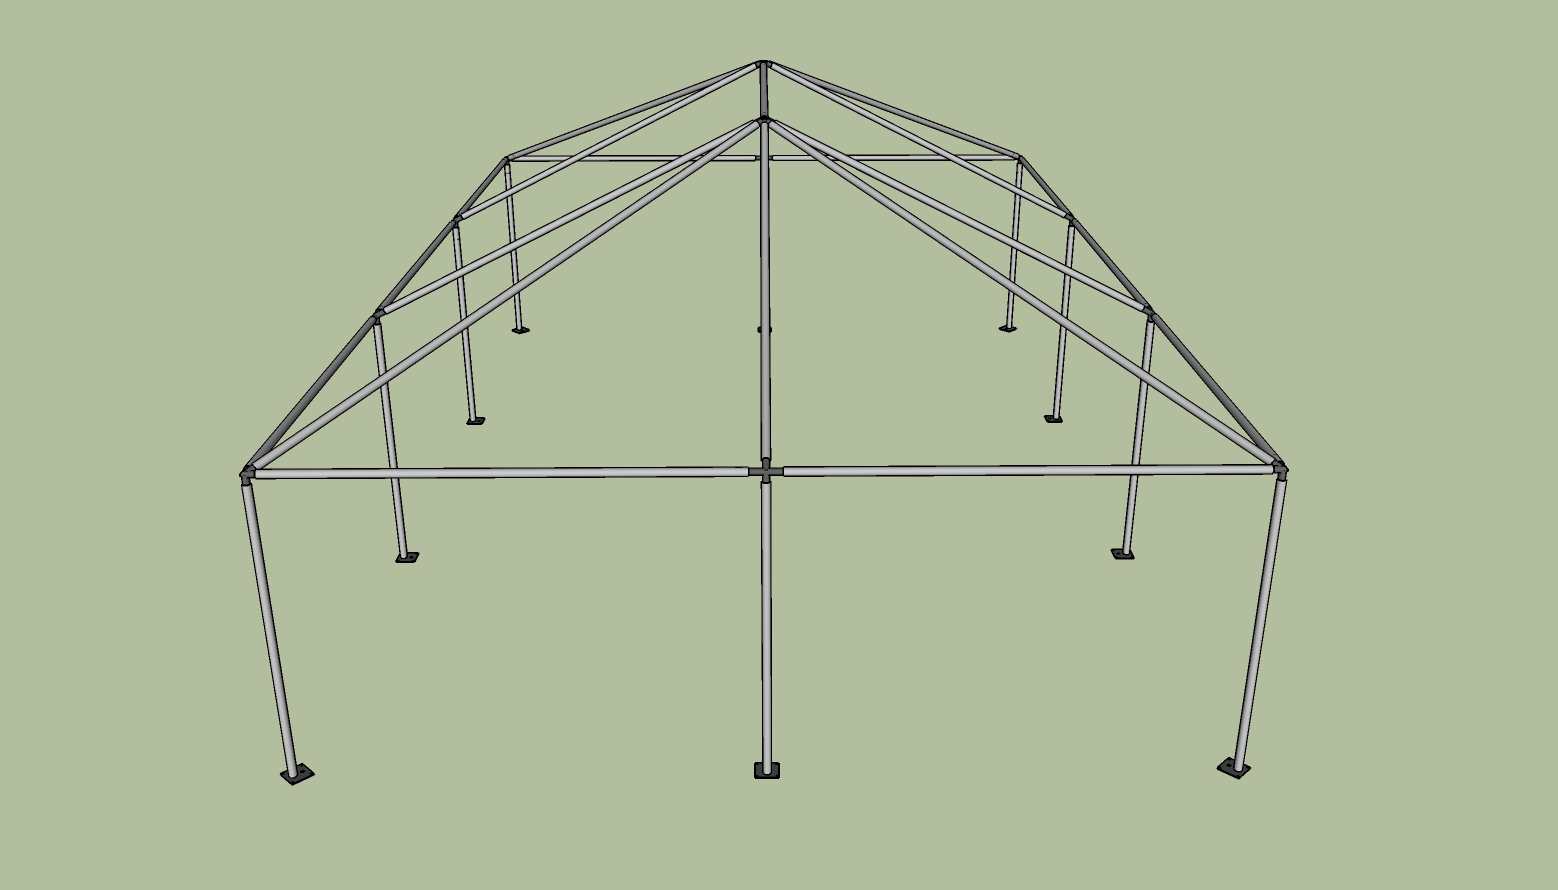 20x30 frame tent side view